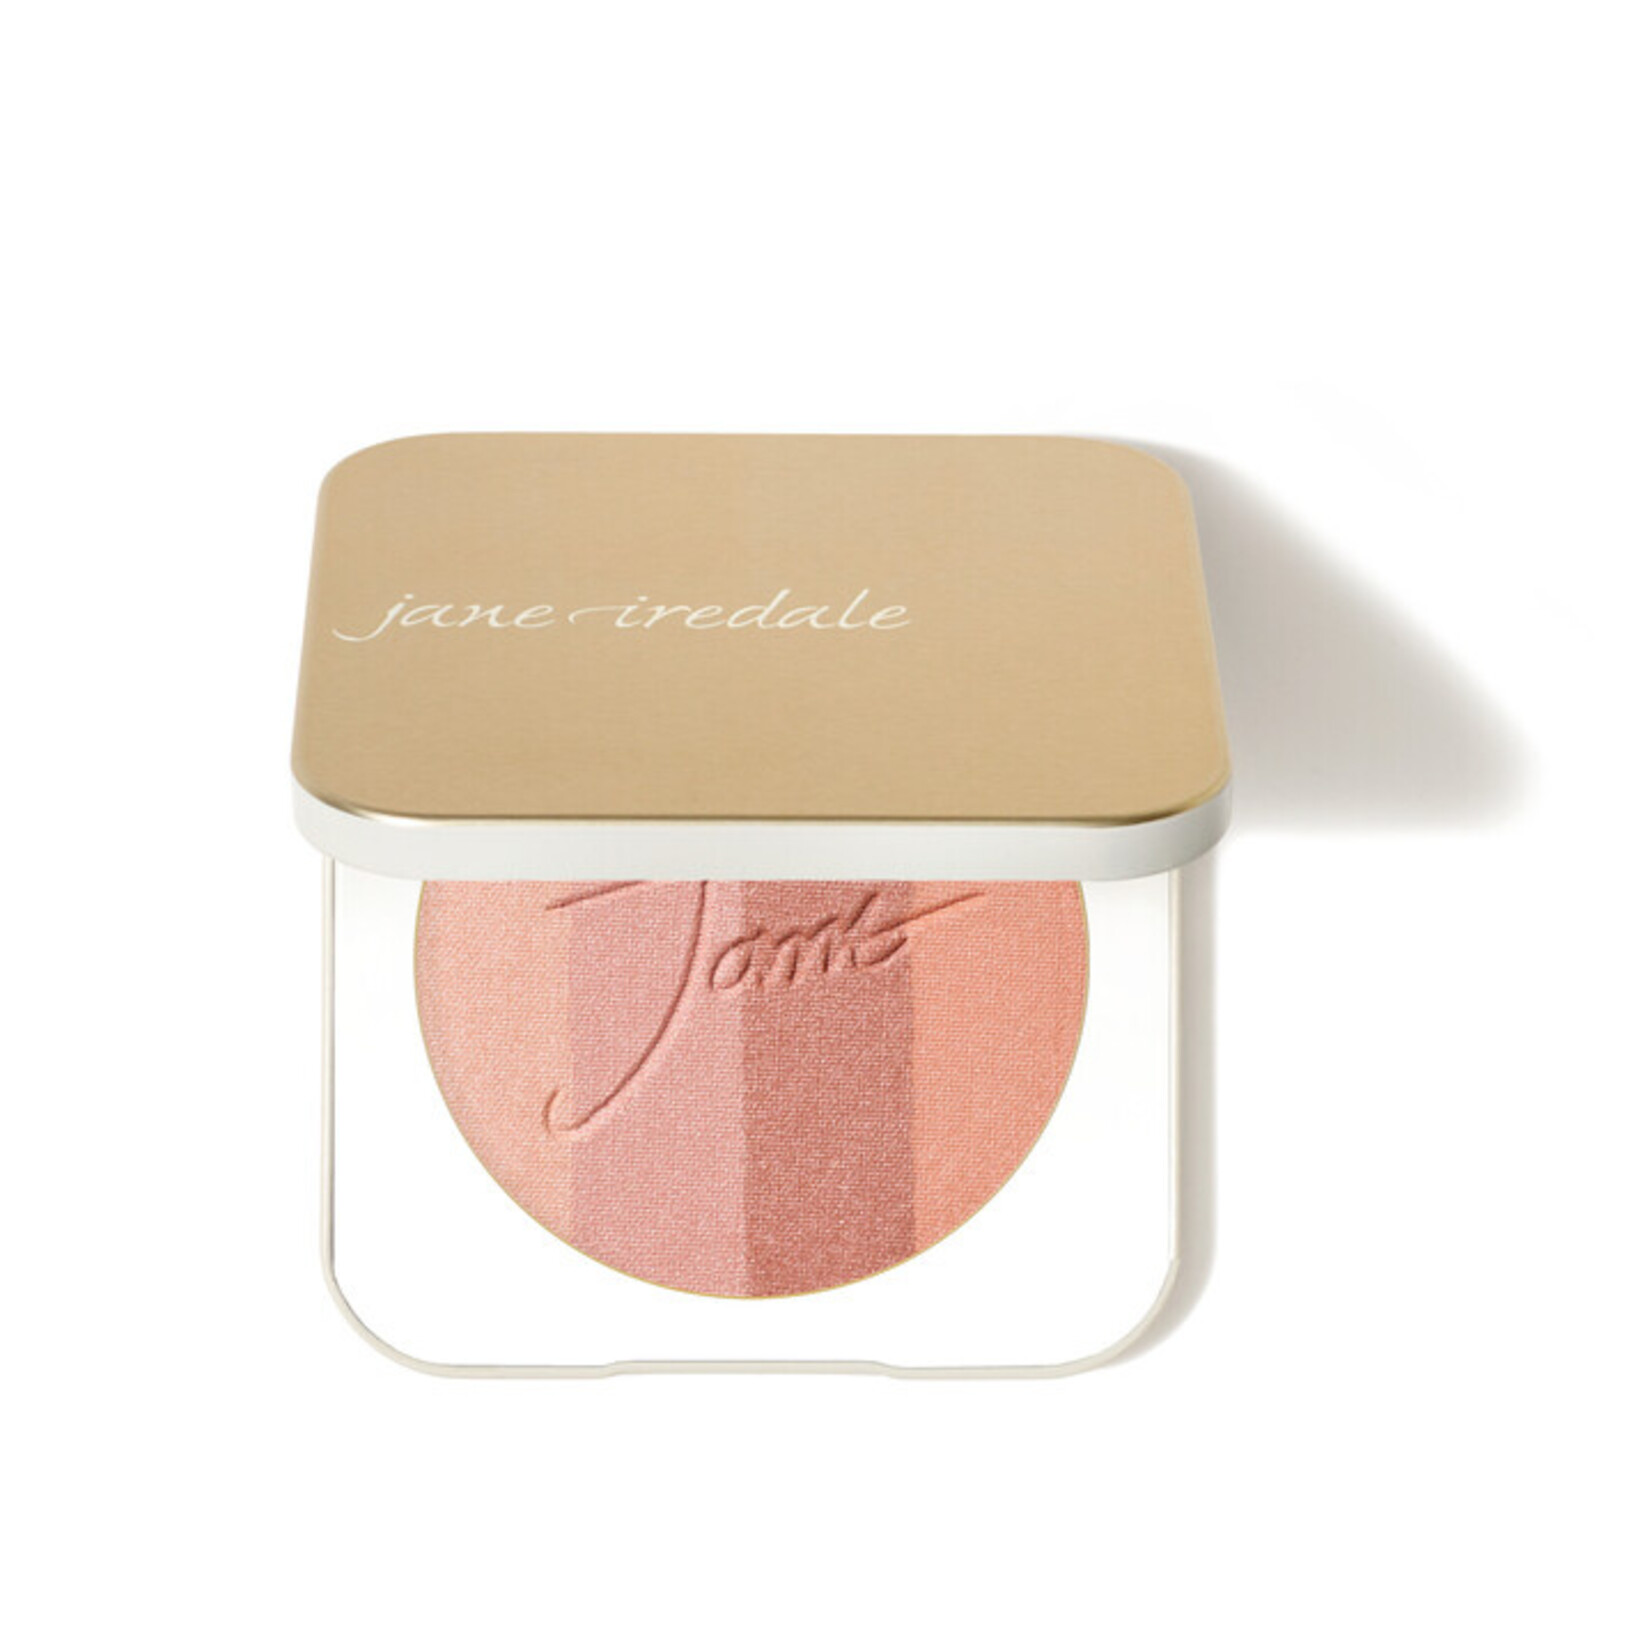 jane iredale PureBronze Shimmer Bronzer incl. Compact